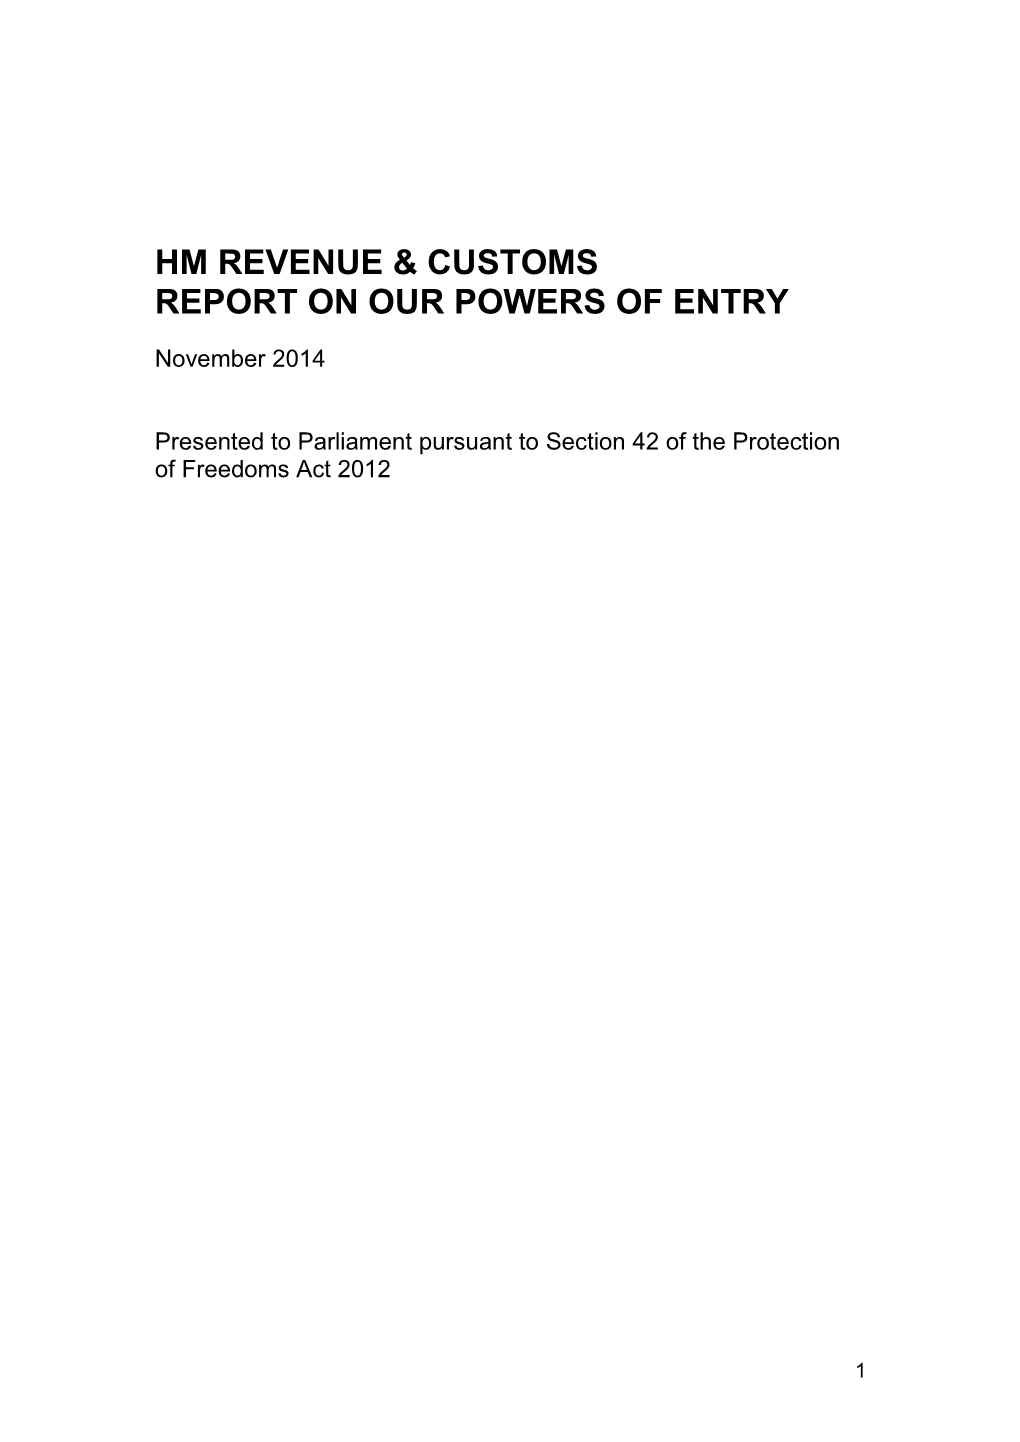 Hm Revenue & Customs Report on Our Powers of Entry